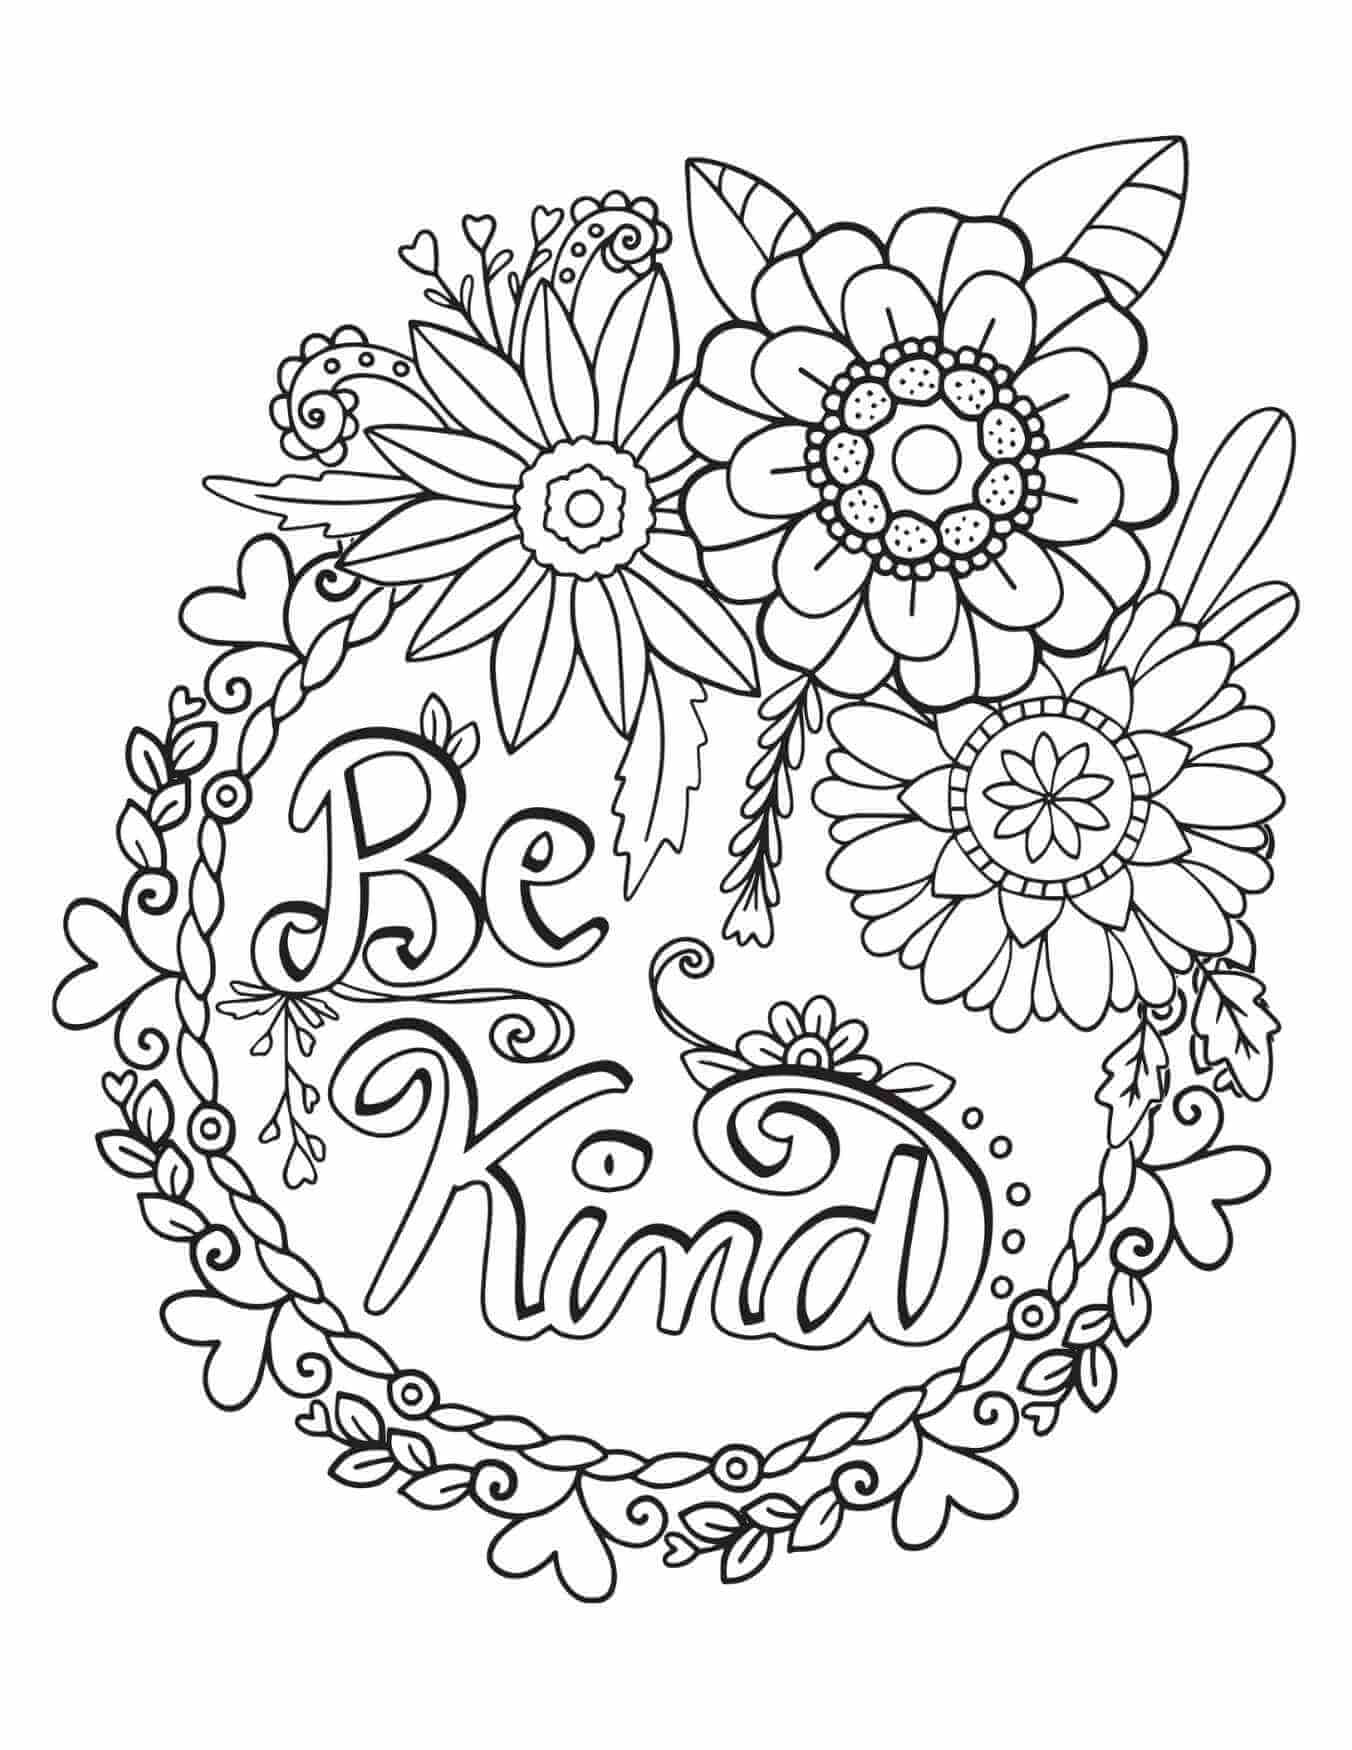 A pretty floral wreath coloring page with the words "be kind" inside in open text. 